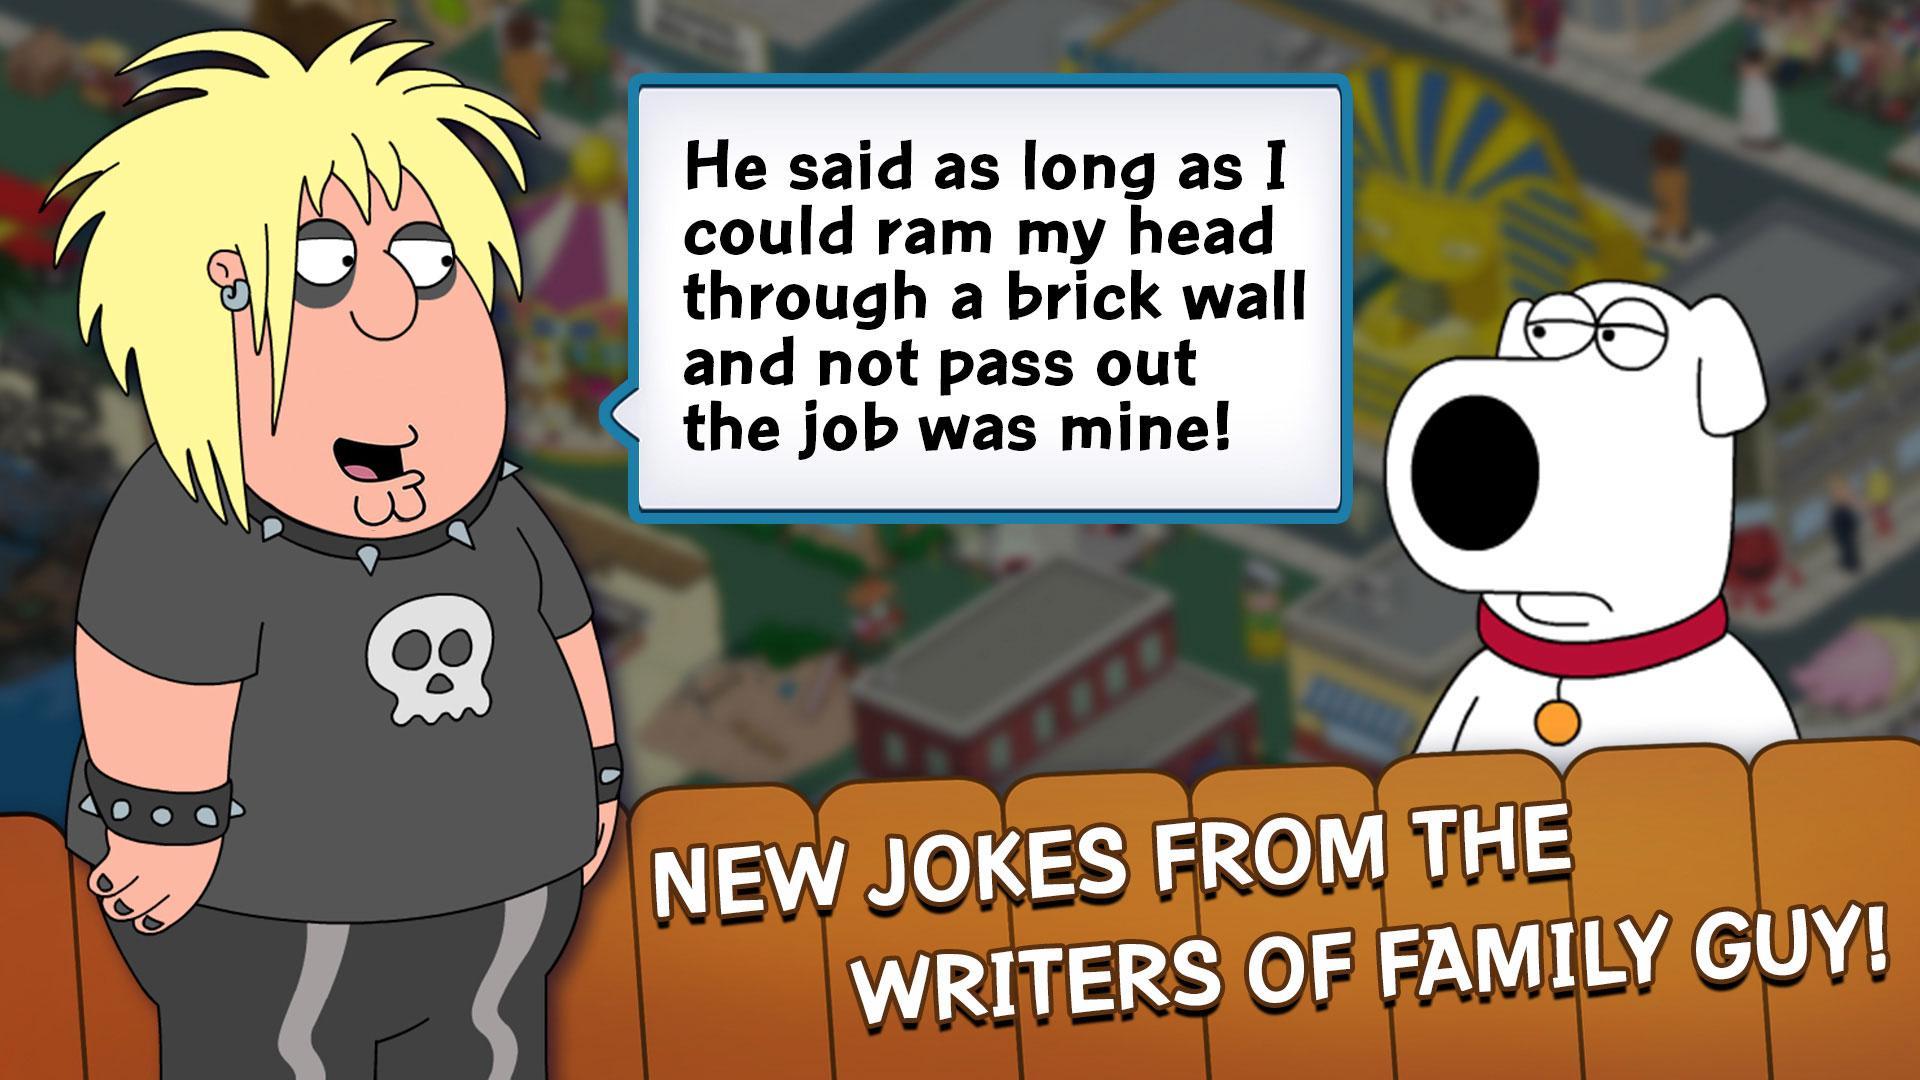 Family Guy The Quest for Stuff 3.8.1 Screenshot 12